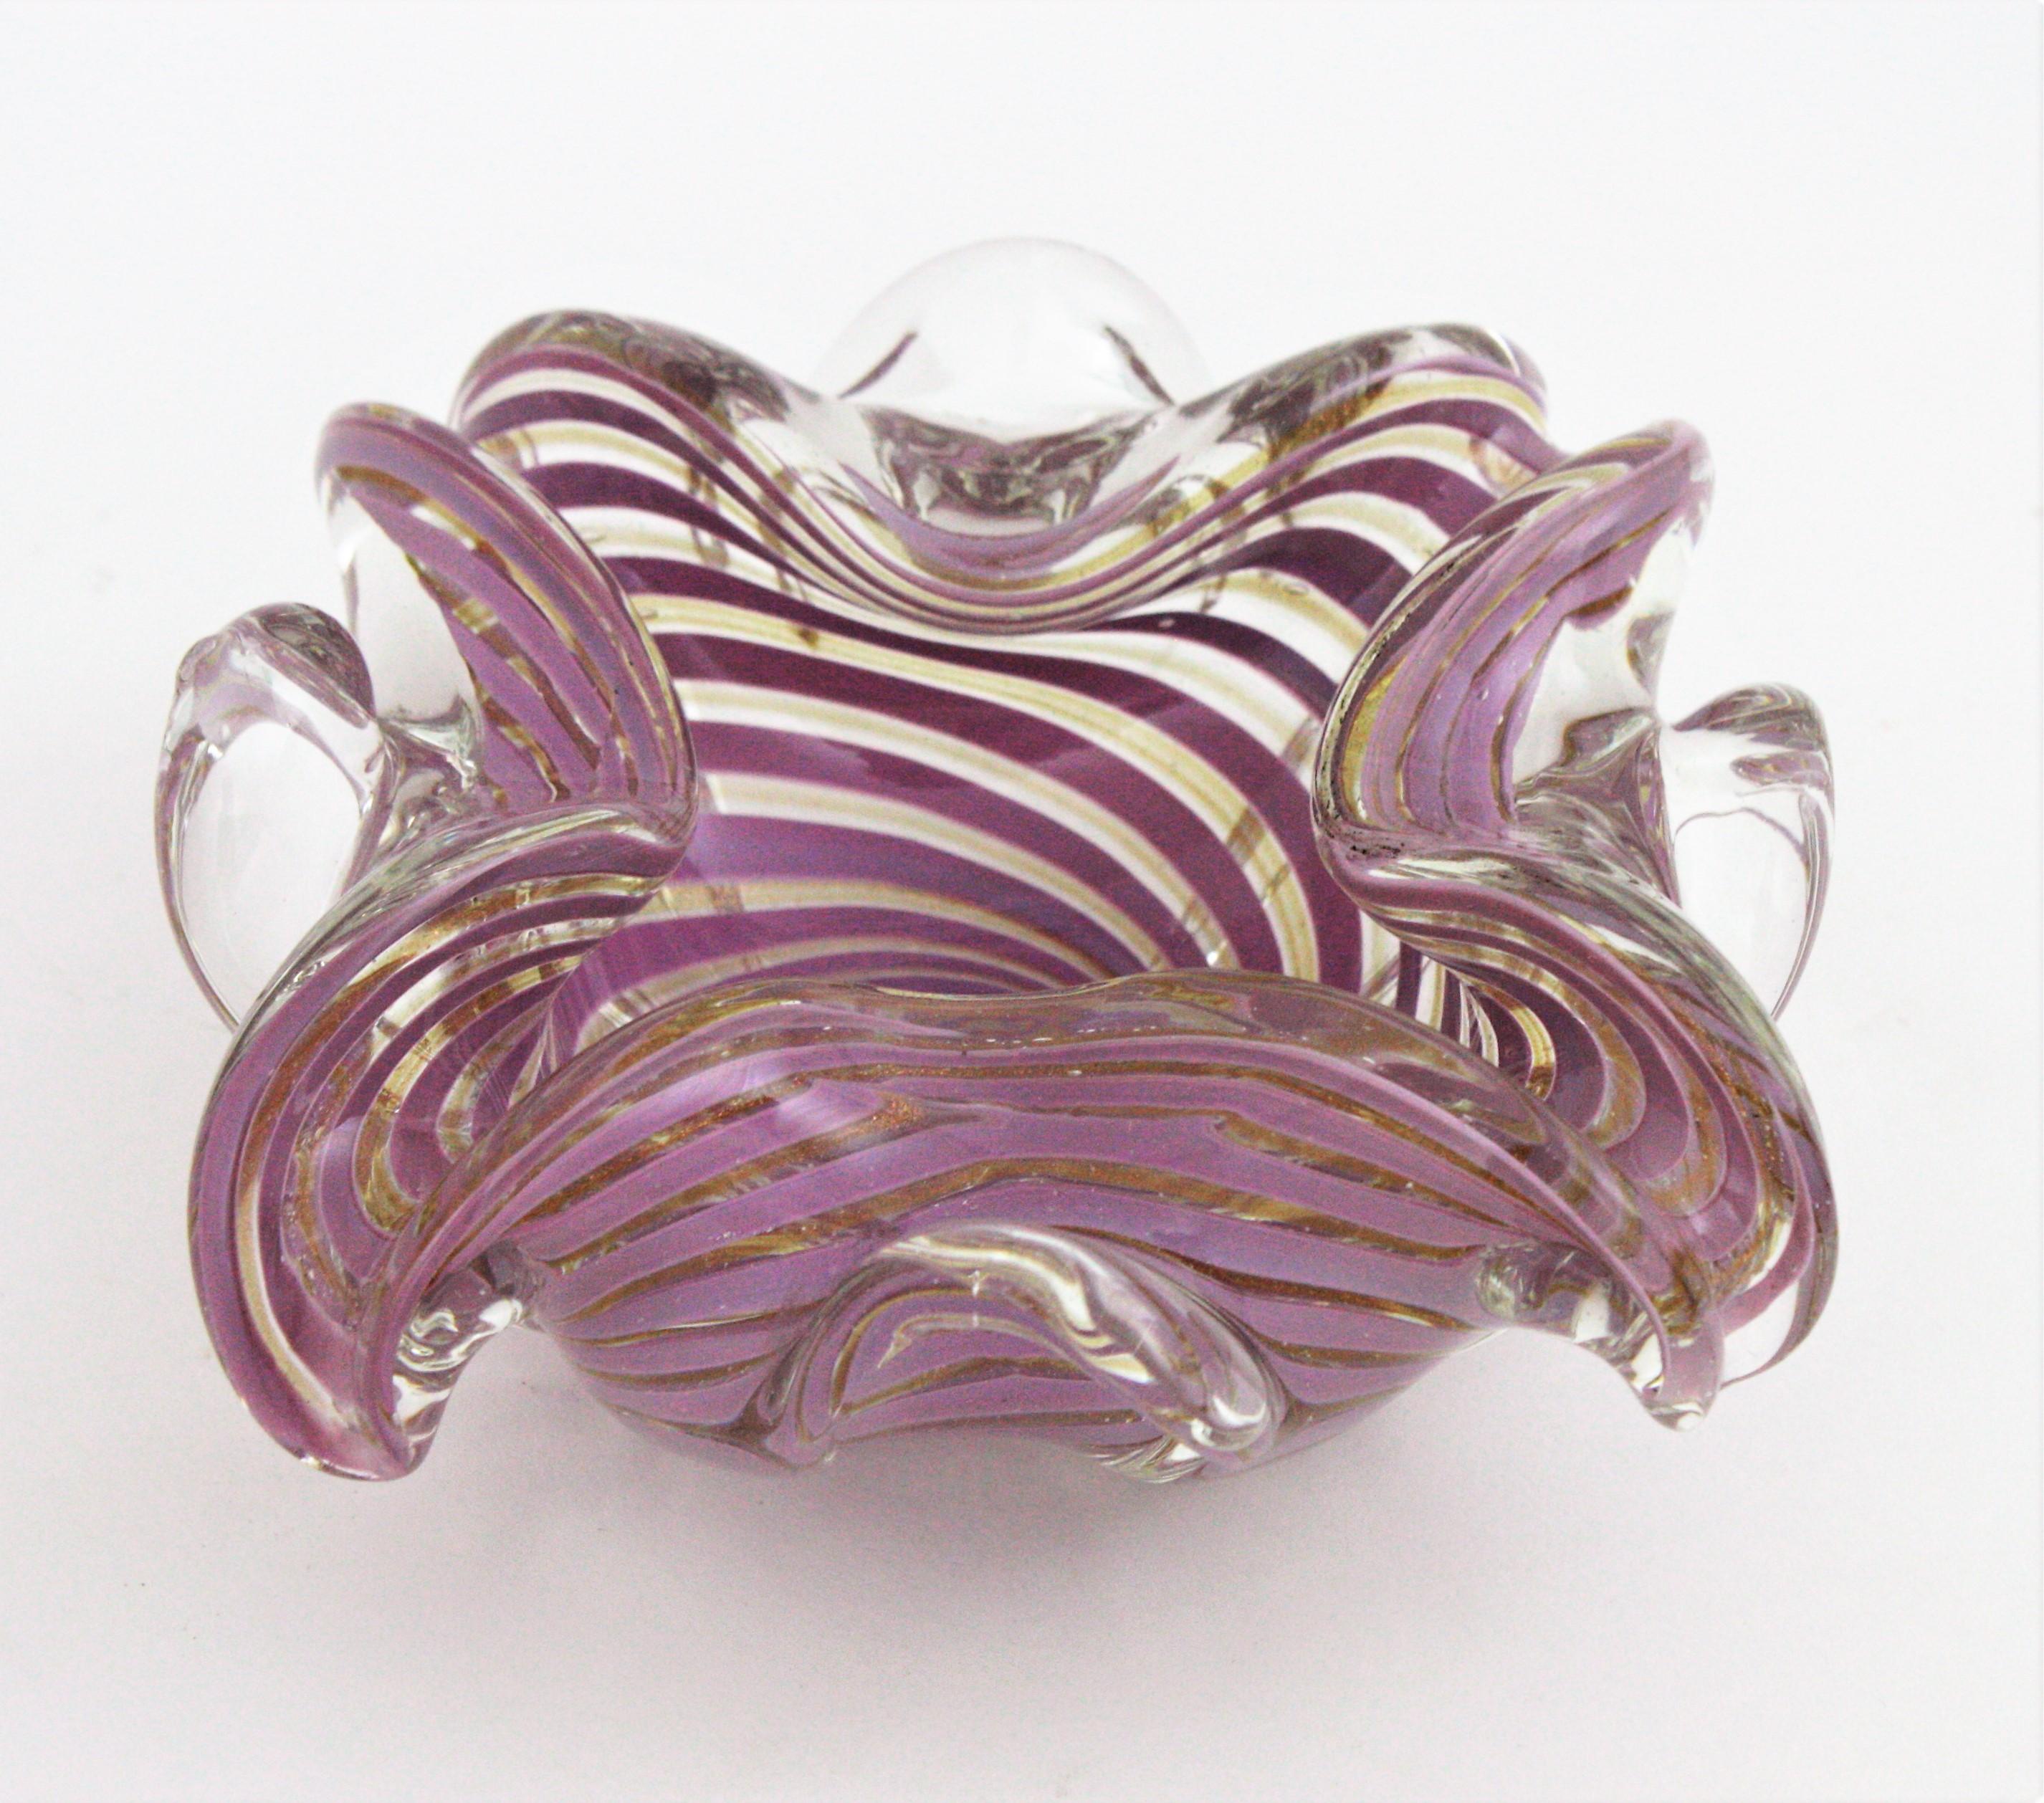 Fratelli Toso Murano Glass Lilac Swirl Ribbons & Gold Dust Large Bowl / Ashtray en vente 5